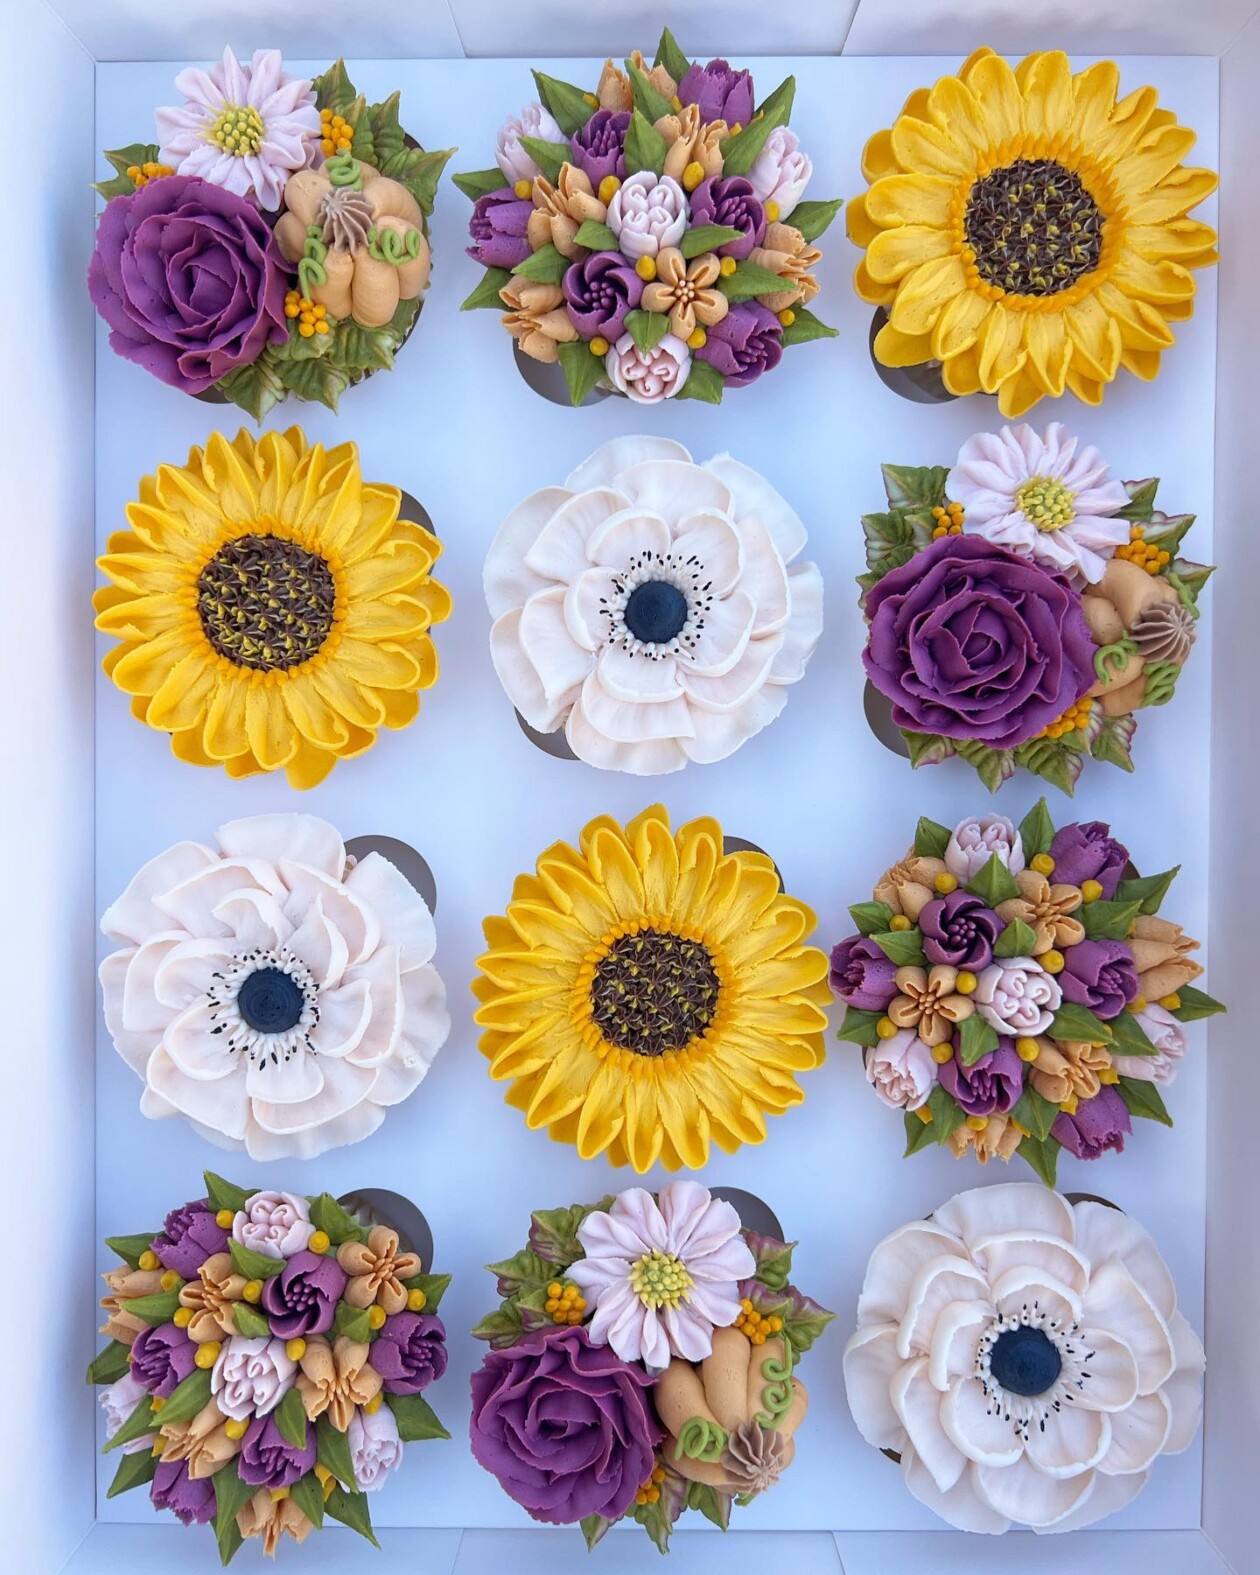 Gorgeous Cupcakes Decorated With Buttercream Flowers And Succulents By Kerry's Bouqcakes (9)